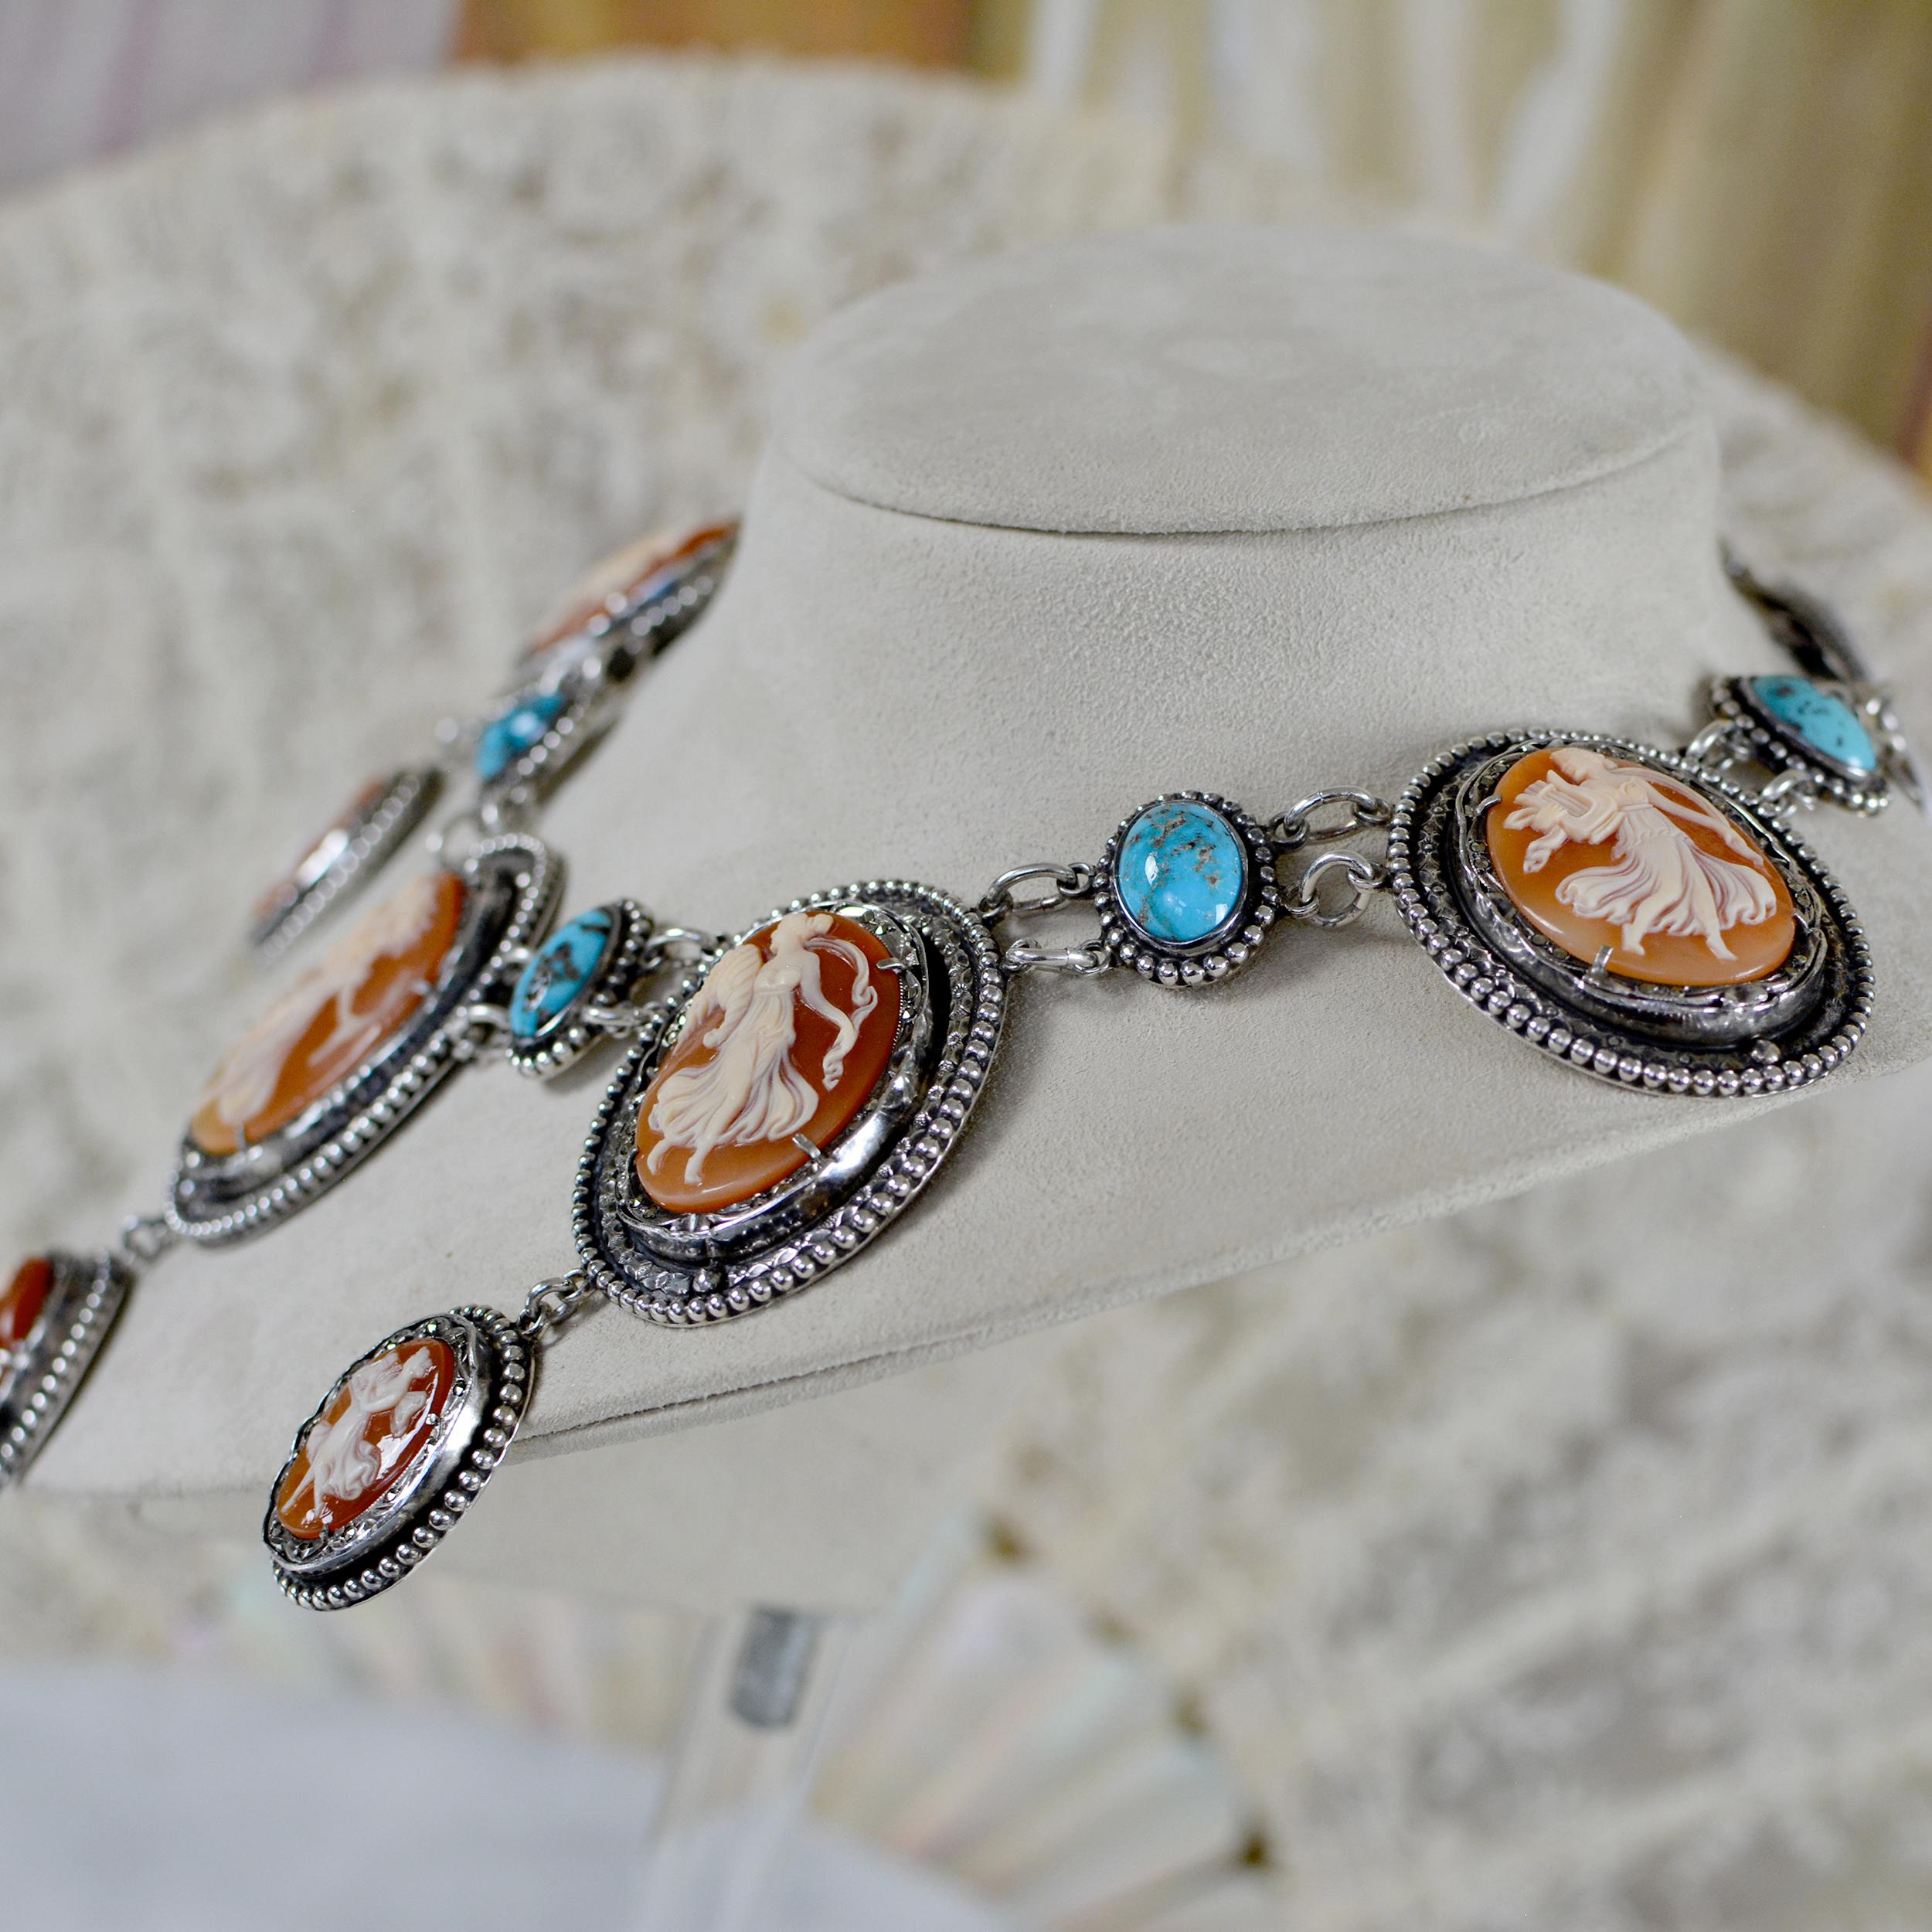 Jill Garber 19th. C. Terpsichore Cameo Suite Necklace with Persian Turquoise  For Sale 4